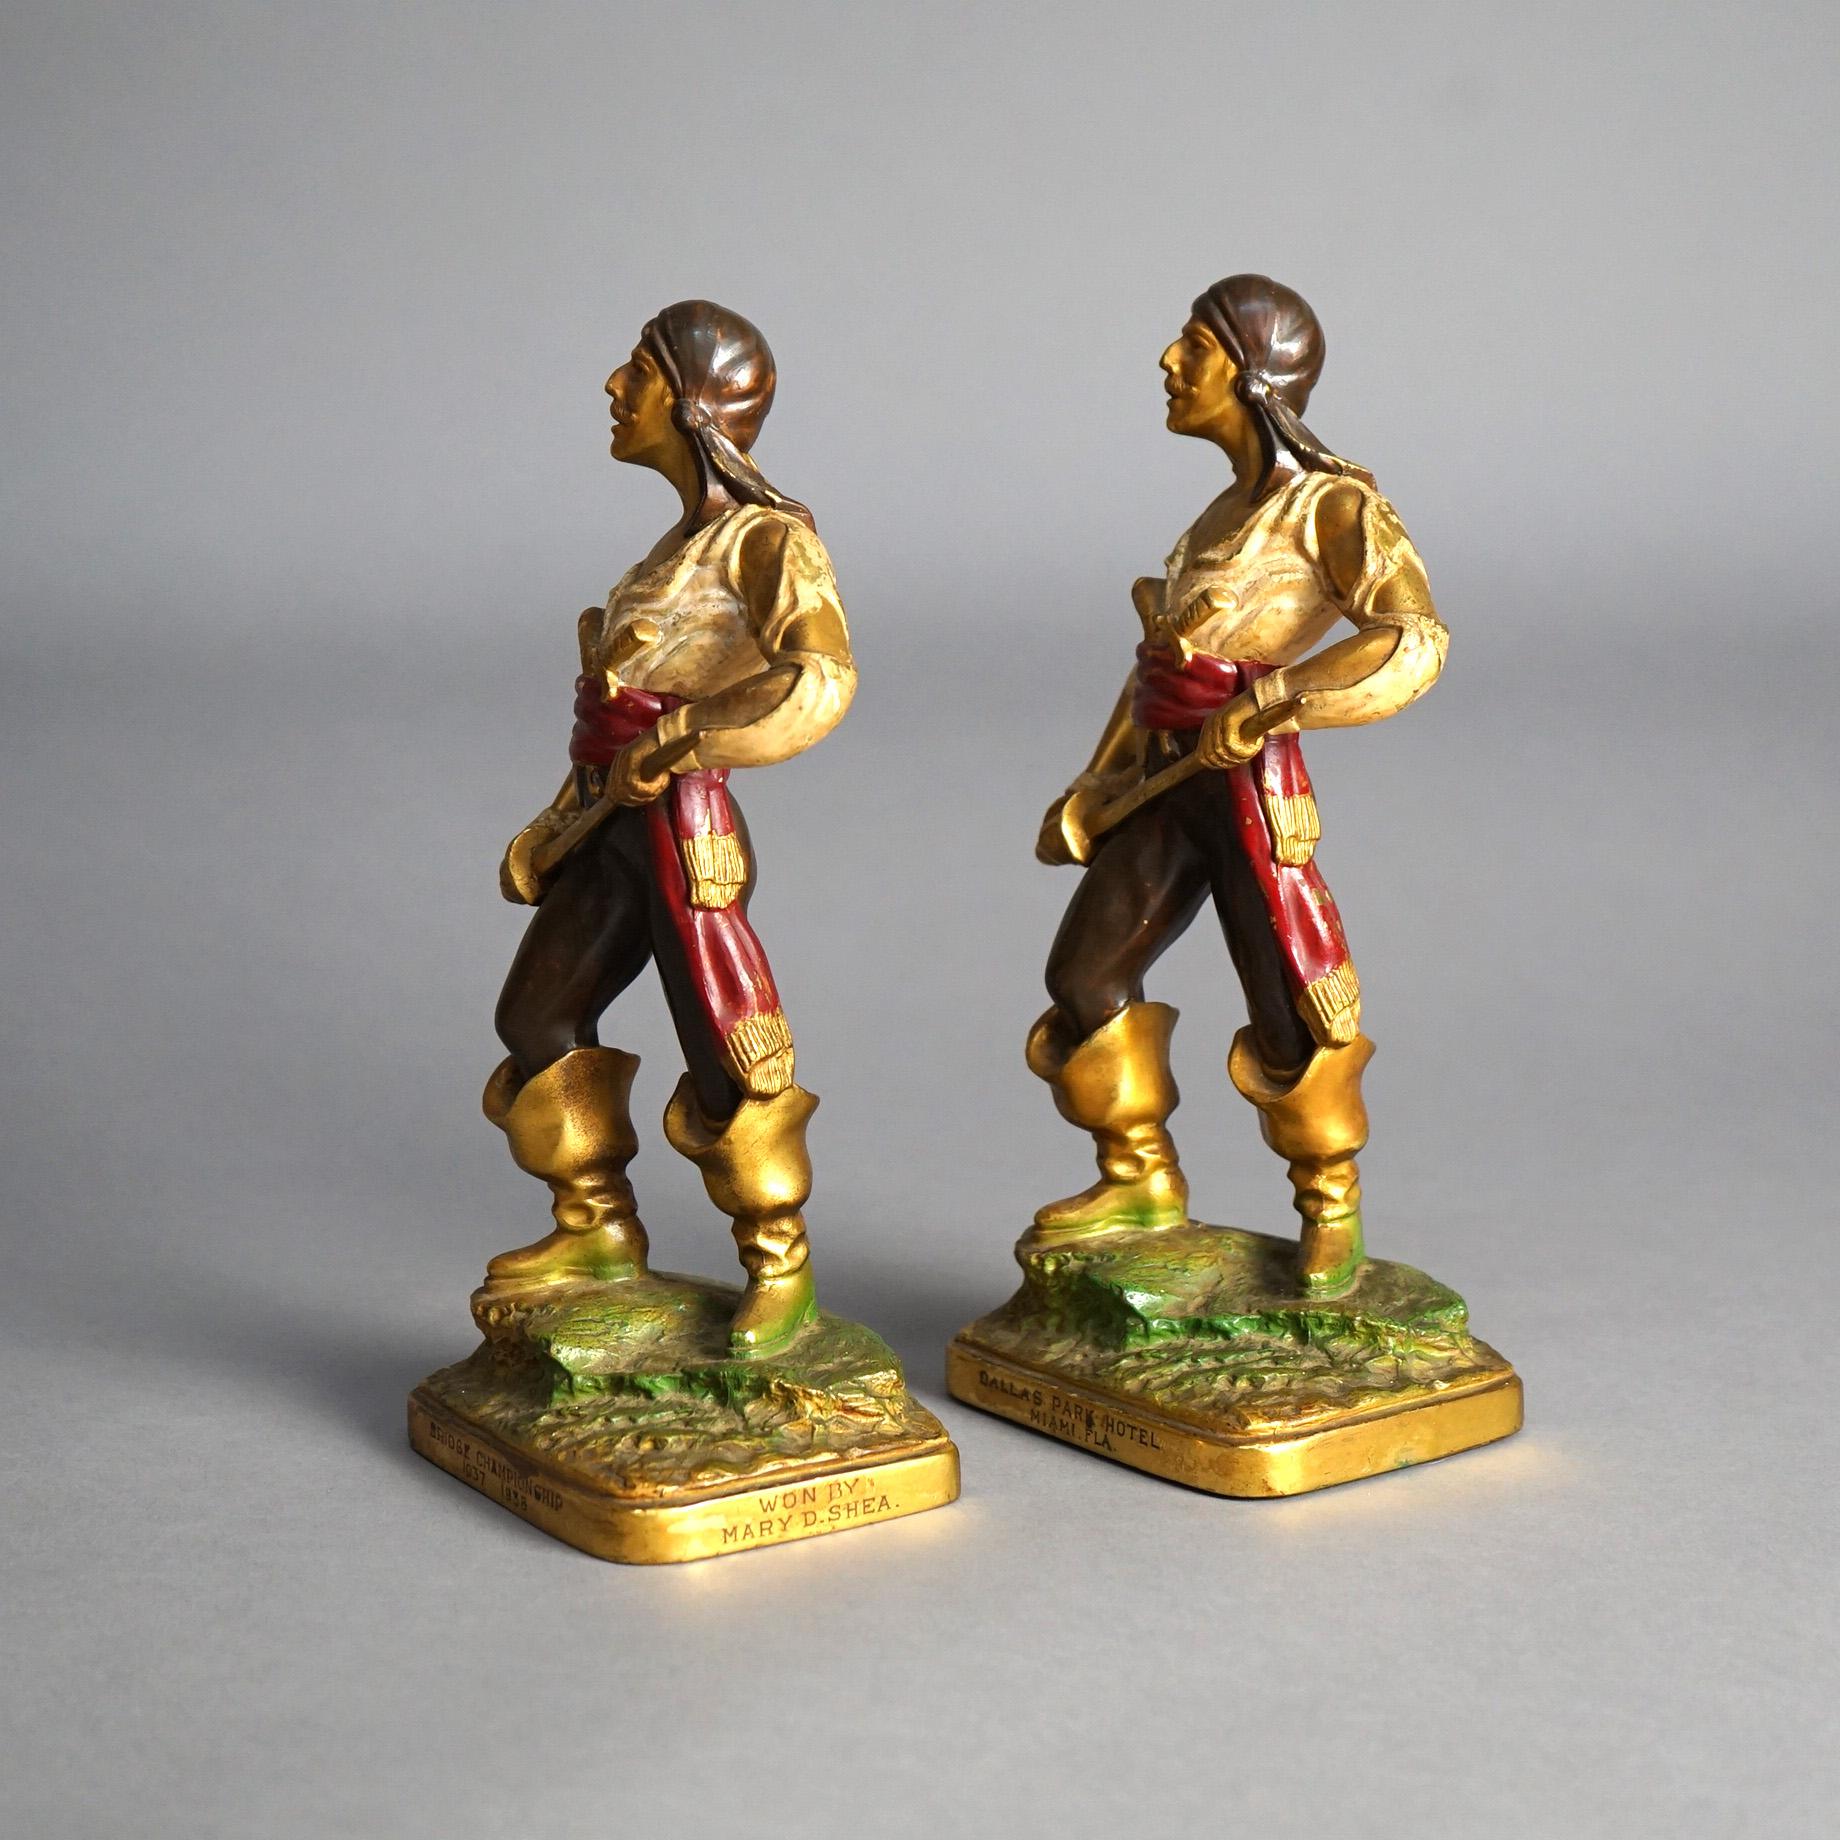 Antique Pair of Polychrome & Bronzed Cast Metal Pirate Figures Circa 1930 For Sale 4